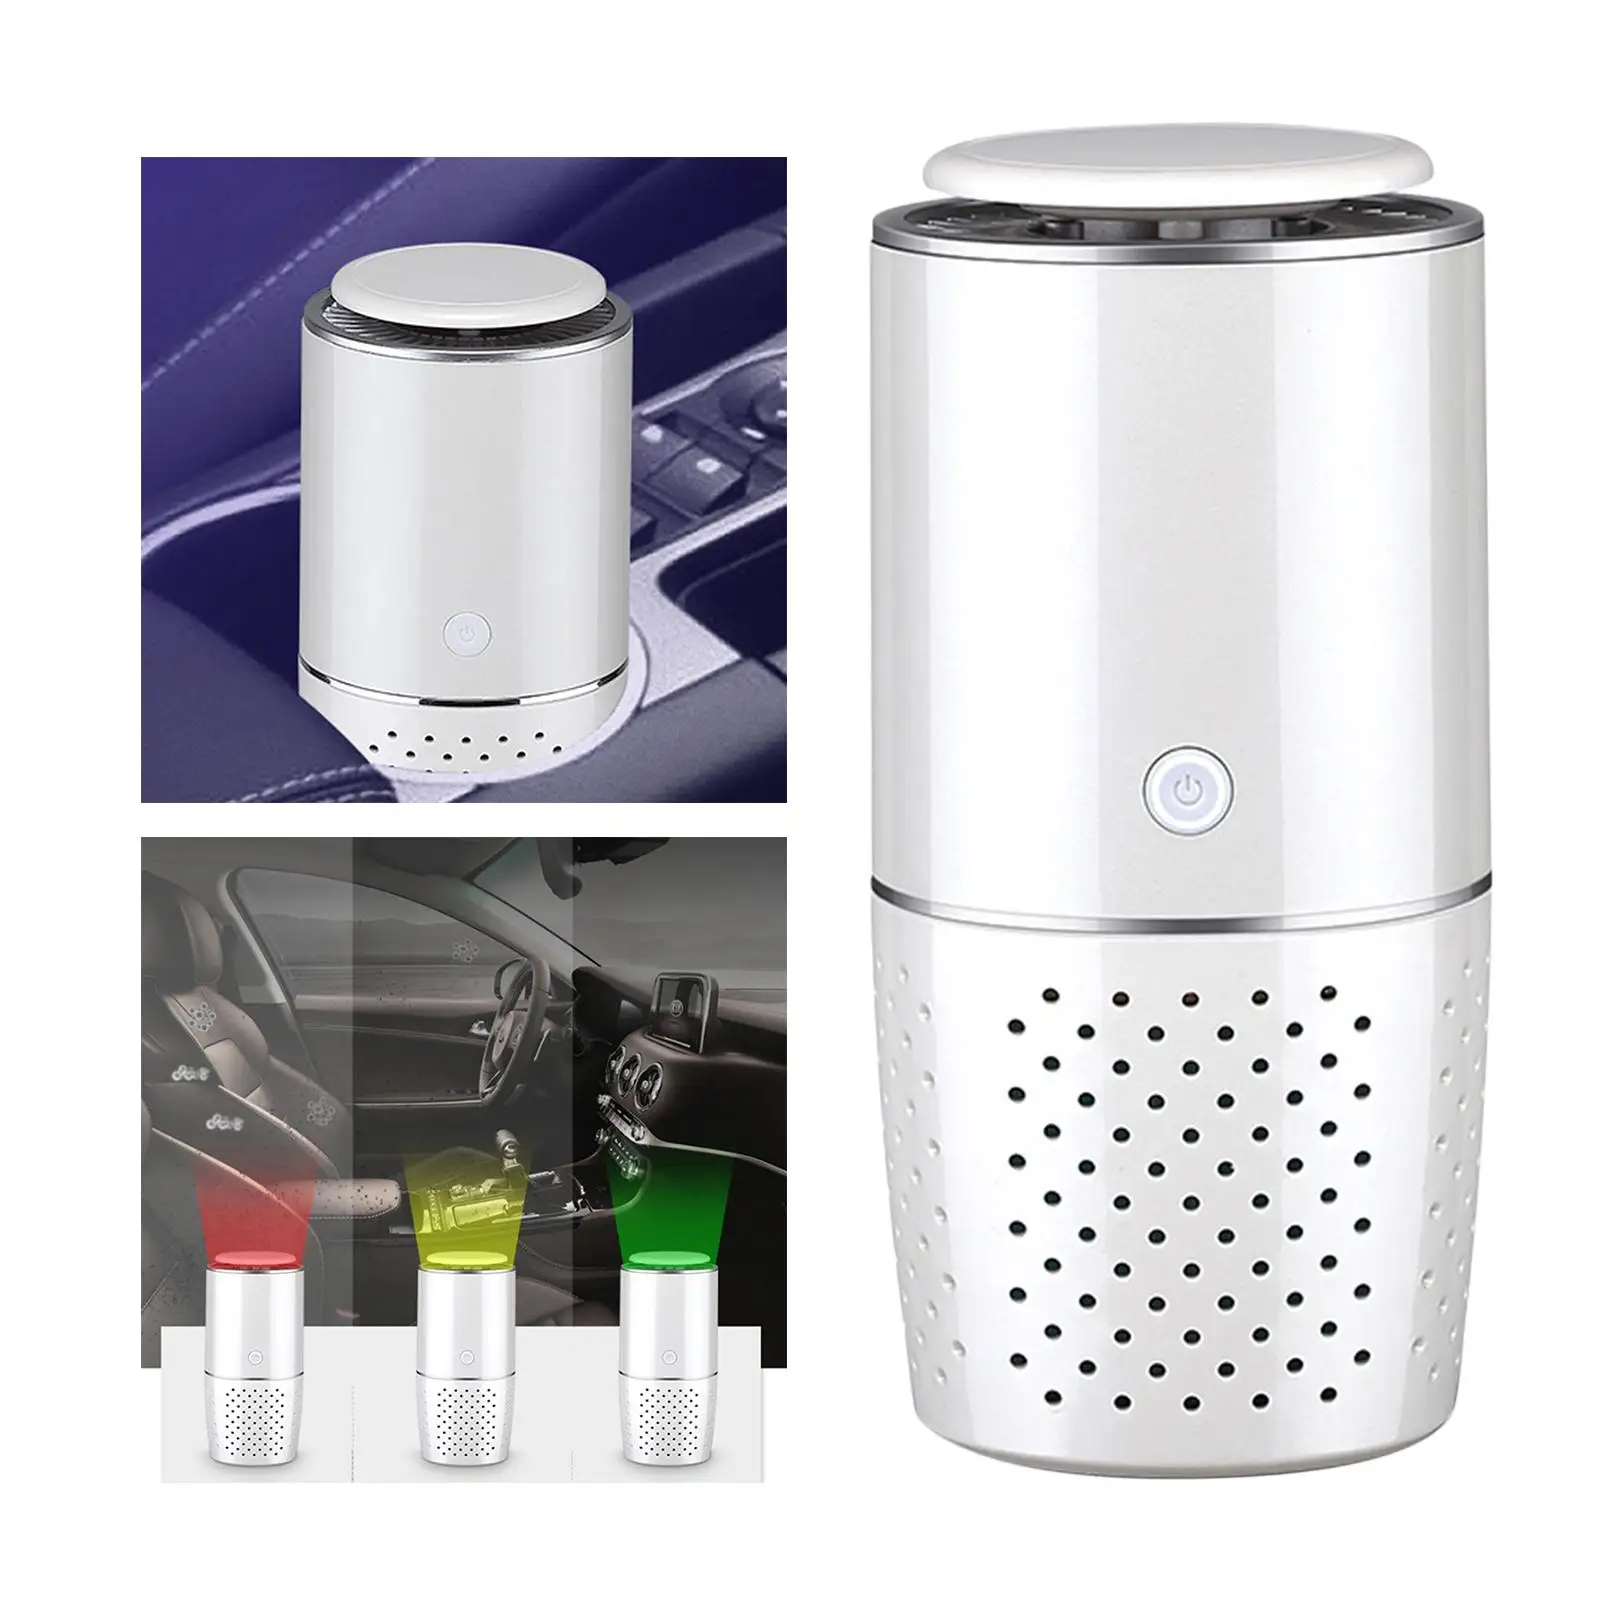 Car  Filter, Portable USB Charger  for Car, Office, Bedroom, Effectively to Remove Dust, Smoke Smell, Pet and Food Odors